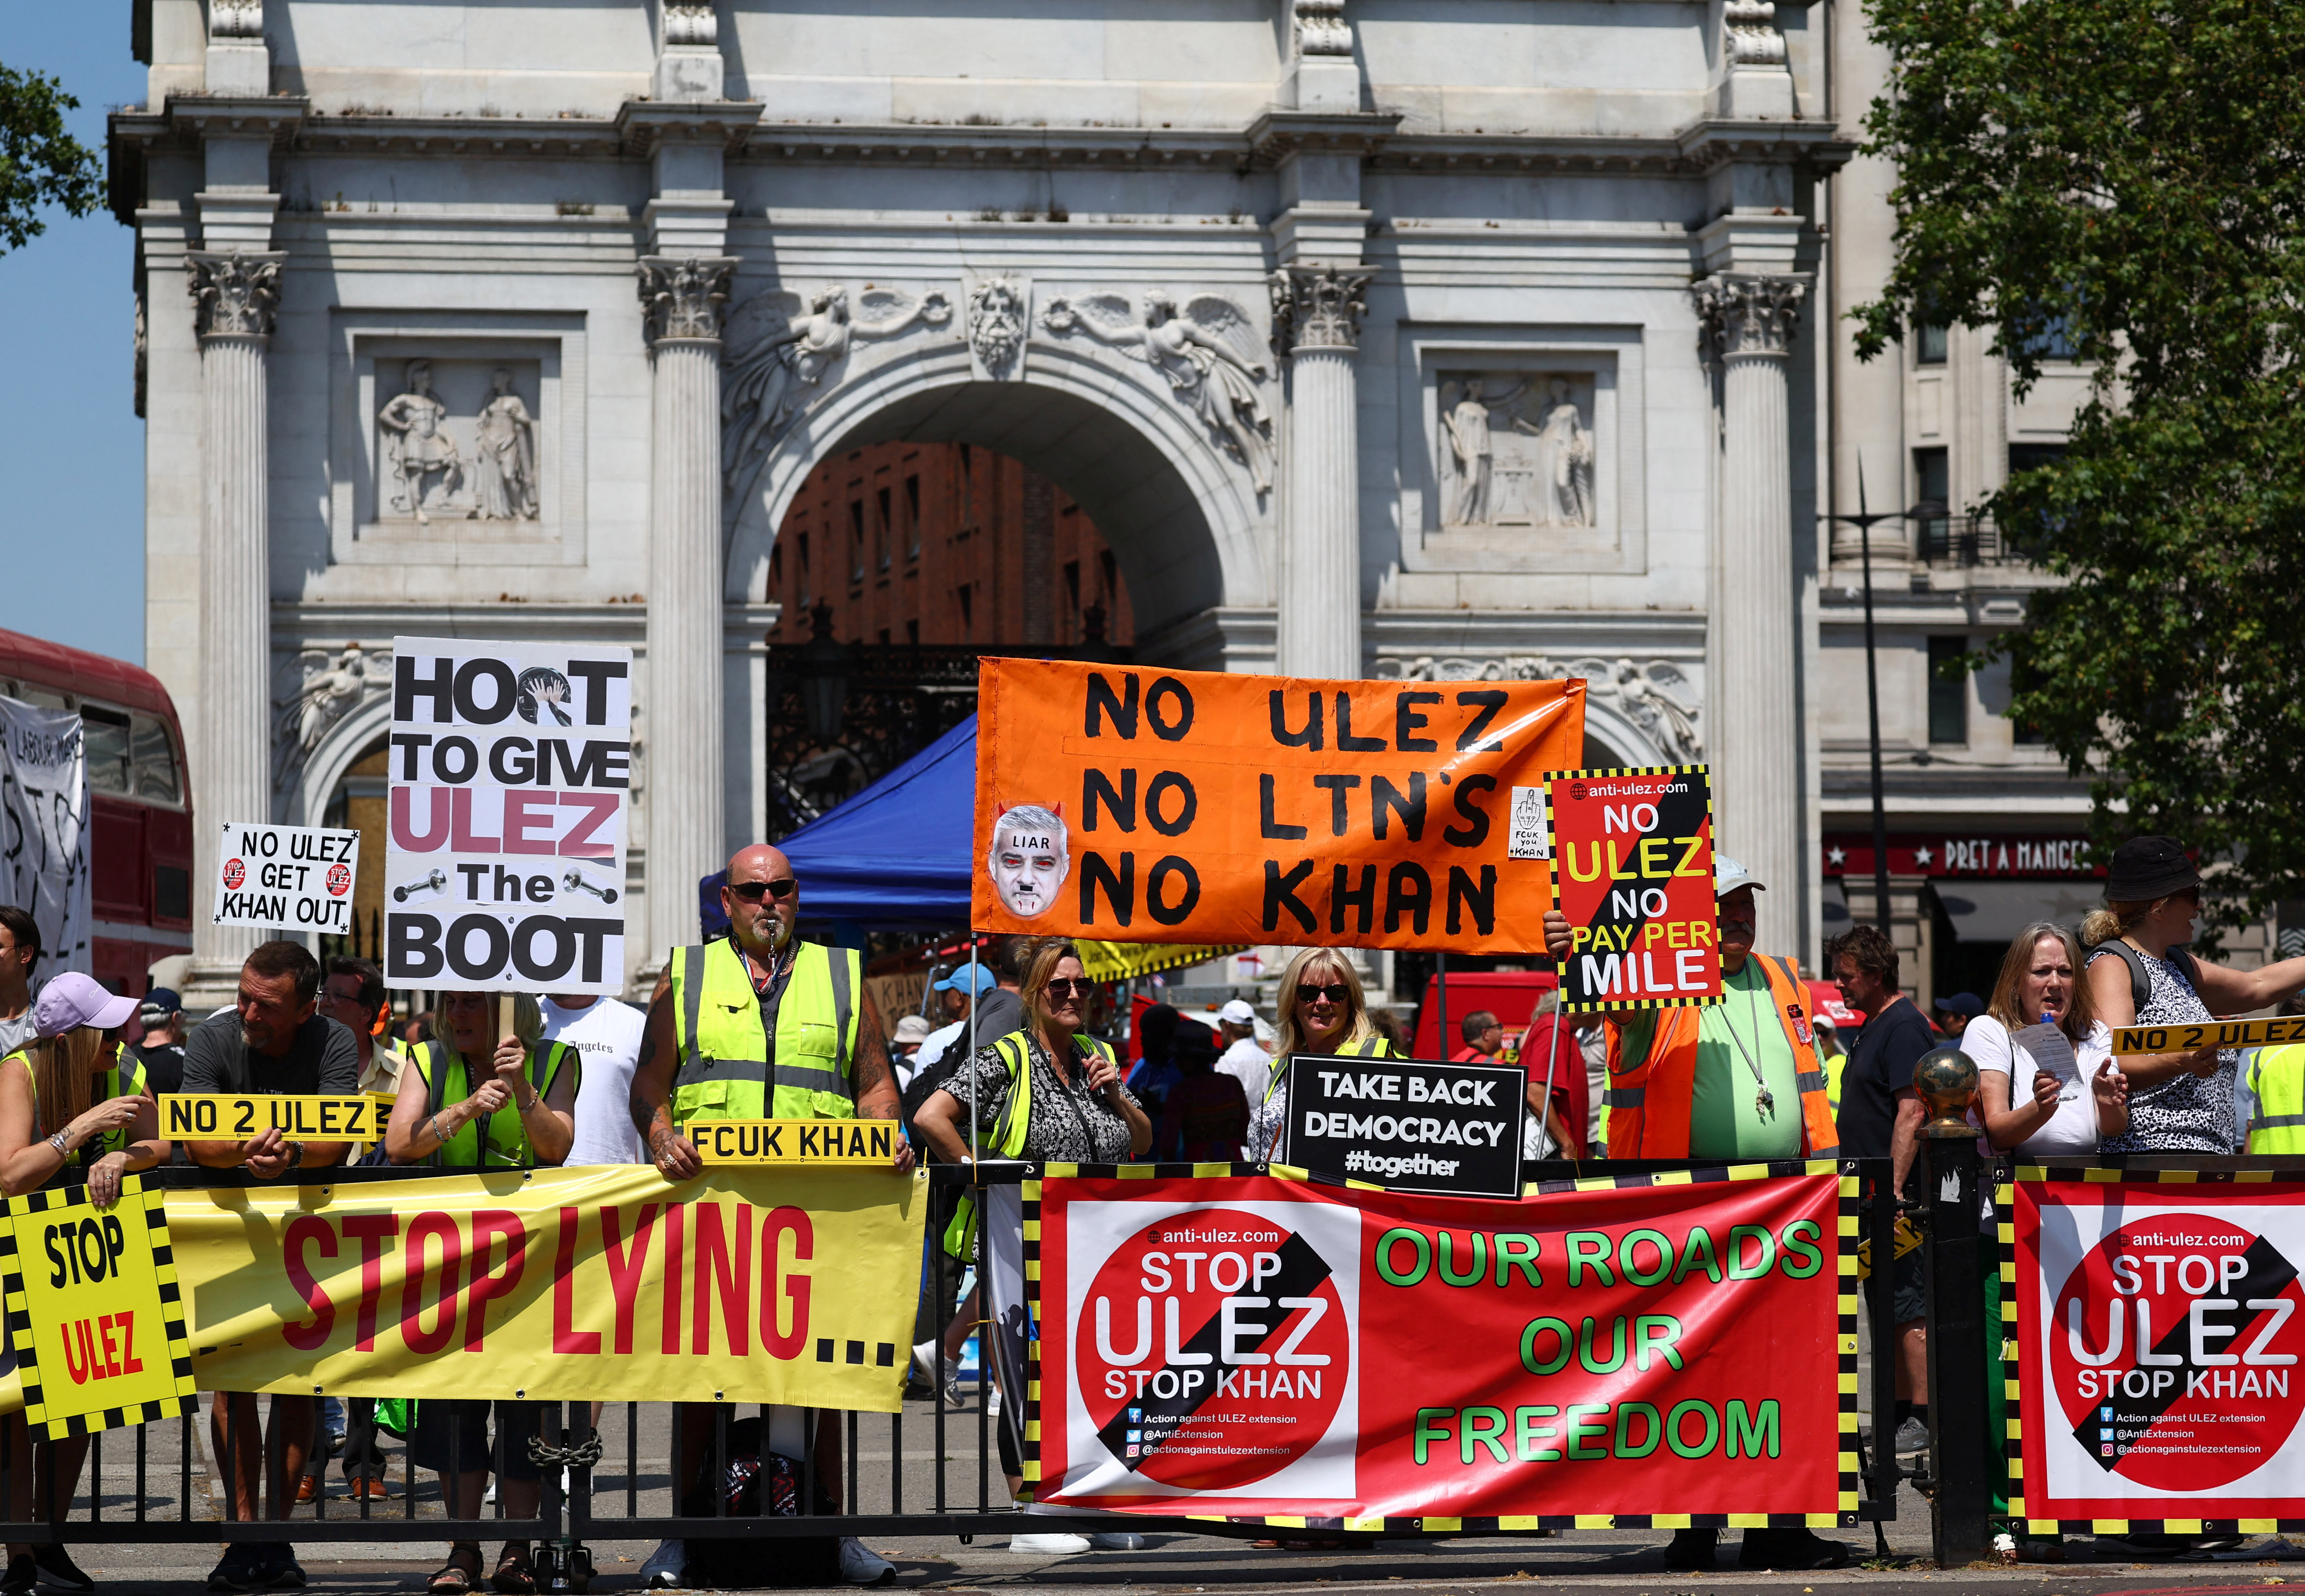 Protest against proposed upcoming expansion of ULEZ tariff on vehicle emissions in London